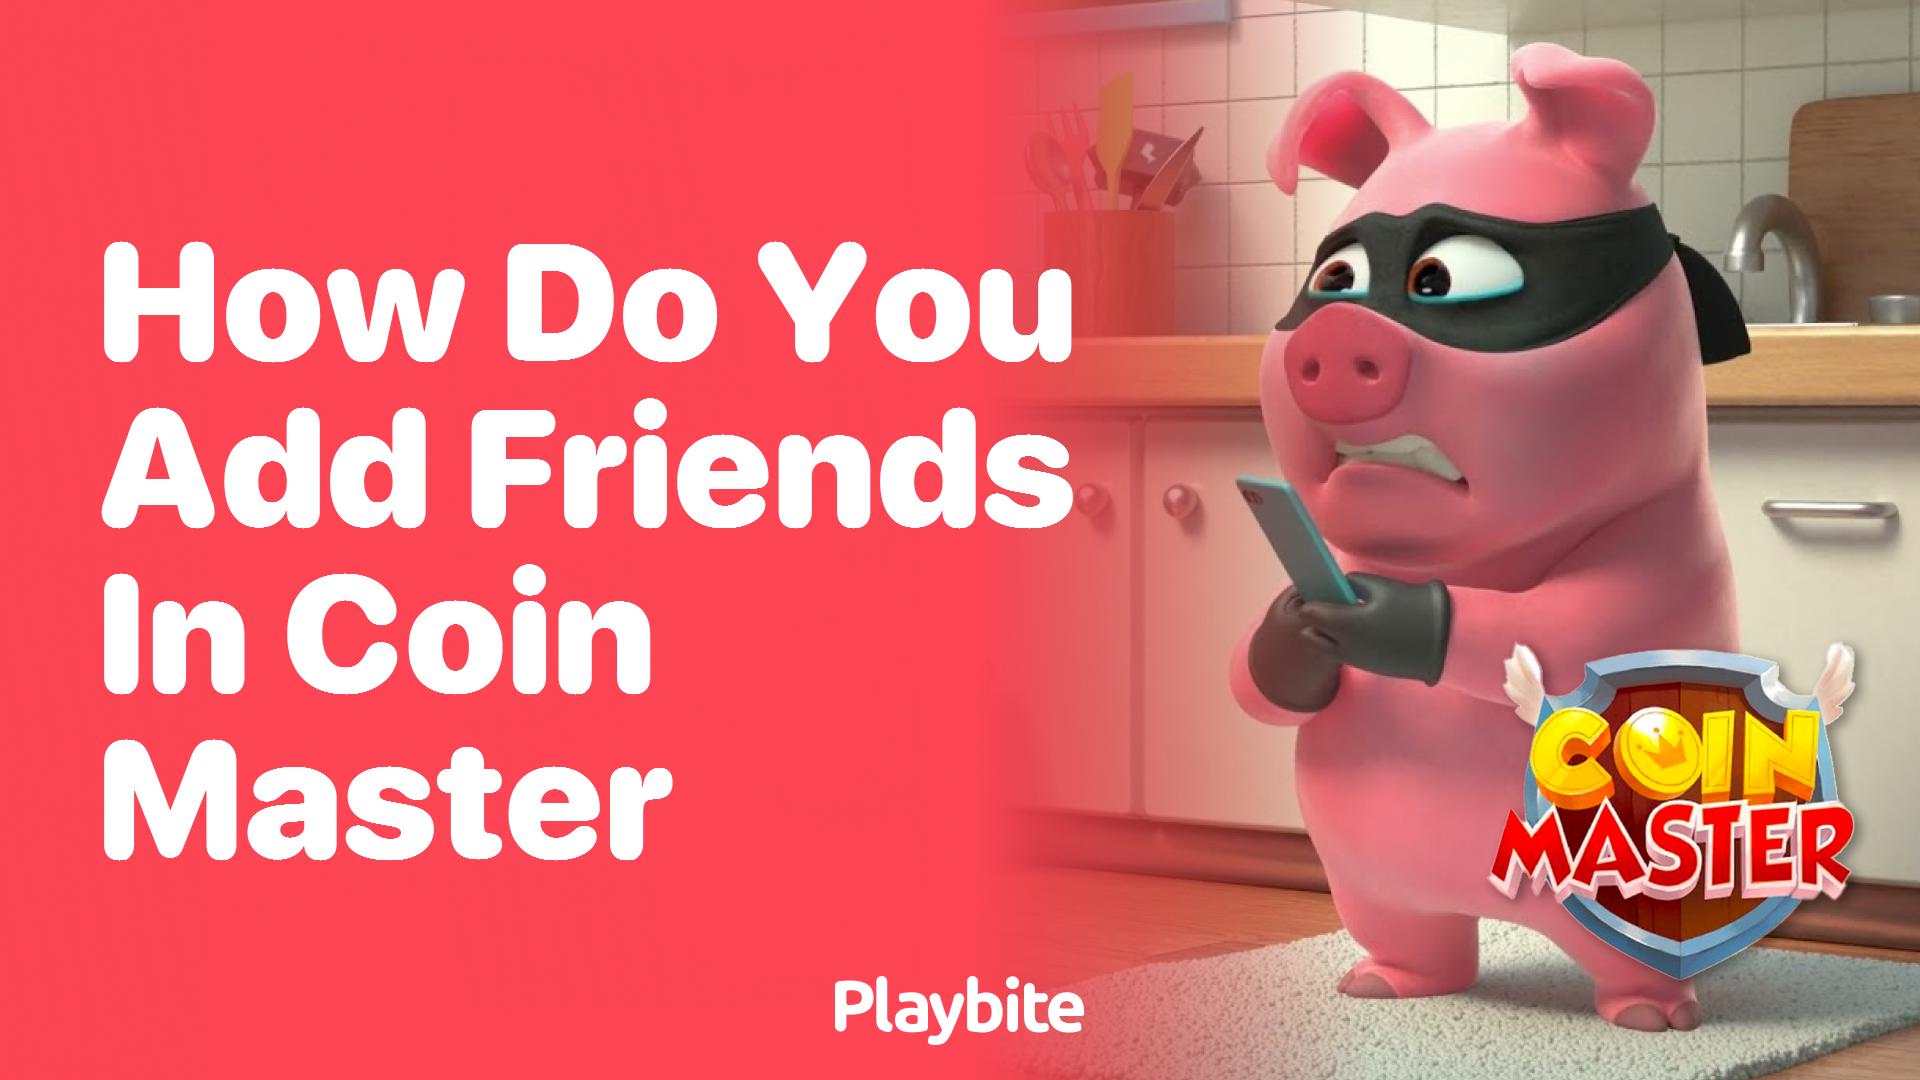 Add your id to find friends on Coin Master on cryptolive.fun